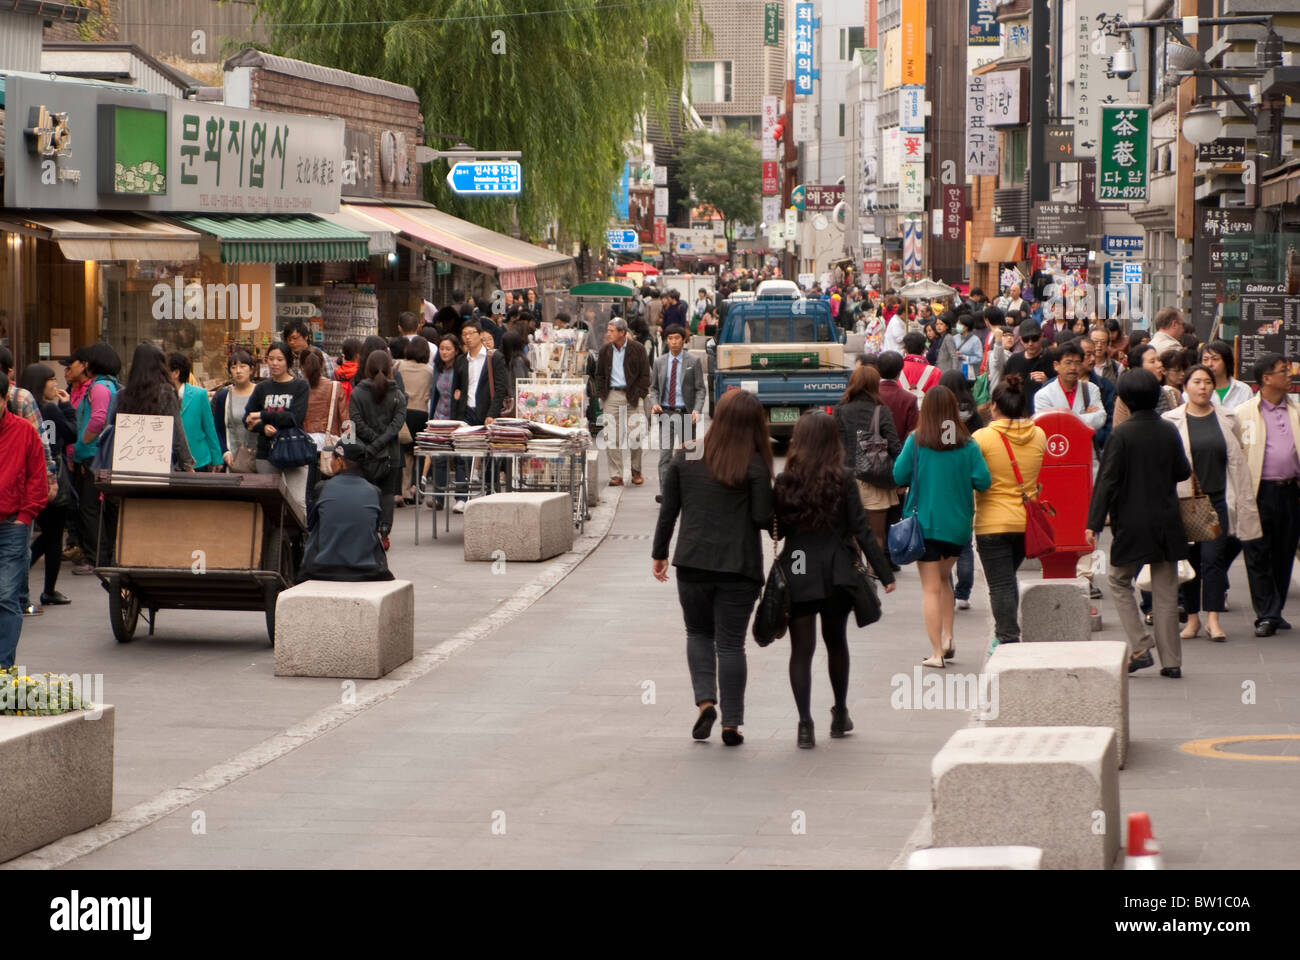 Shoppers strolling in the main thoroughfare of Insadong, popular for tourists, shoppers, and artisans in Seoul, South Korea Stock Photo